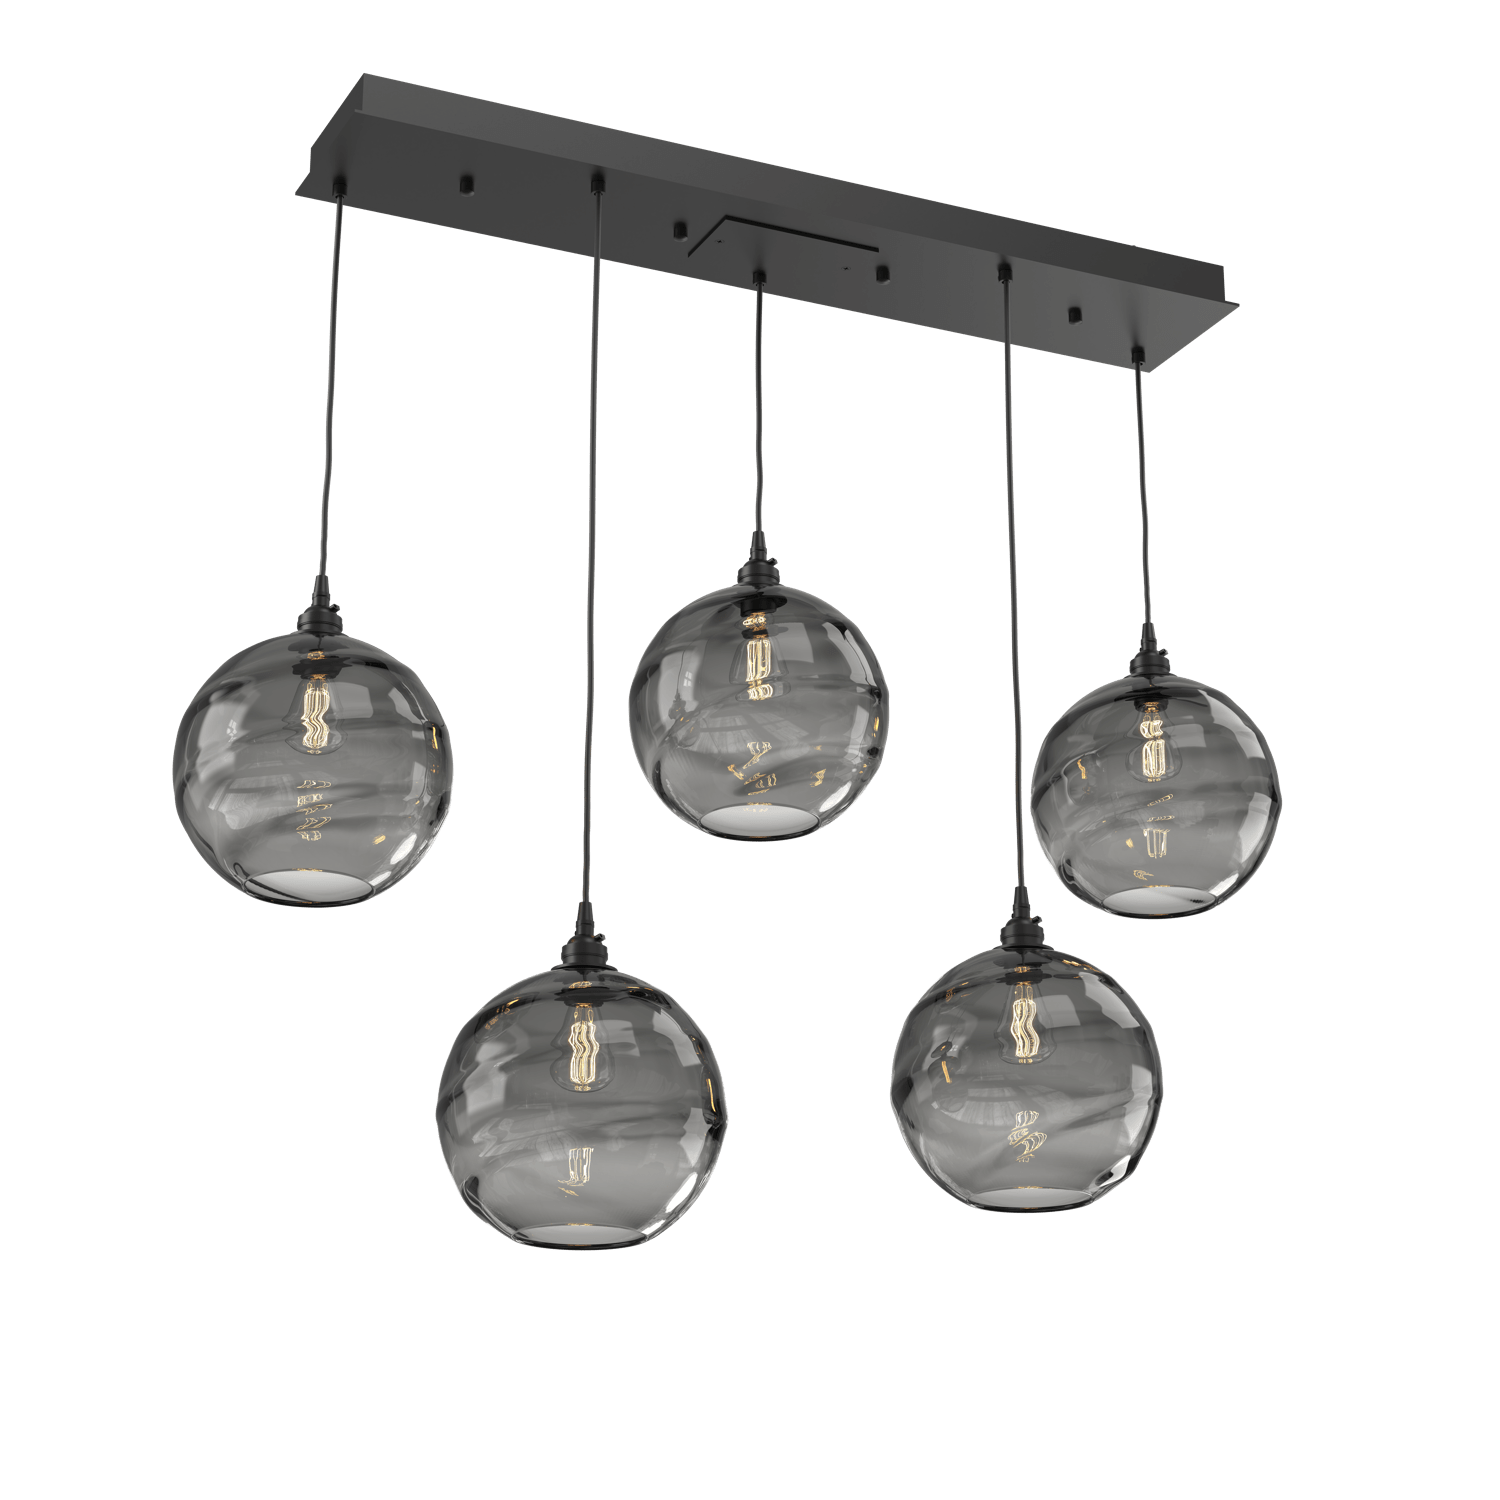 PLB0047-05-MB-OS-Hammerton-Studio-Optic-Blown-Glass-Terra-5-light-linear-pendant-chandelier-with-matte-black-finish-and-optic-smoke-blown-glass-shades-and-incandescent-lamping